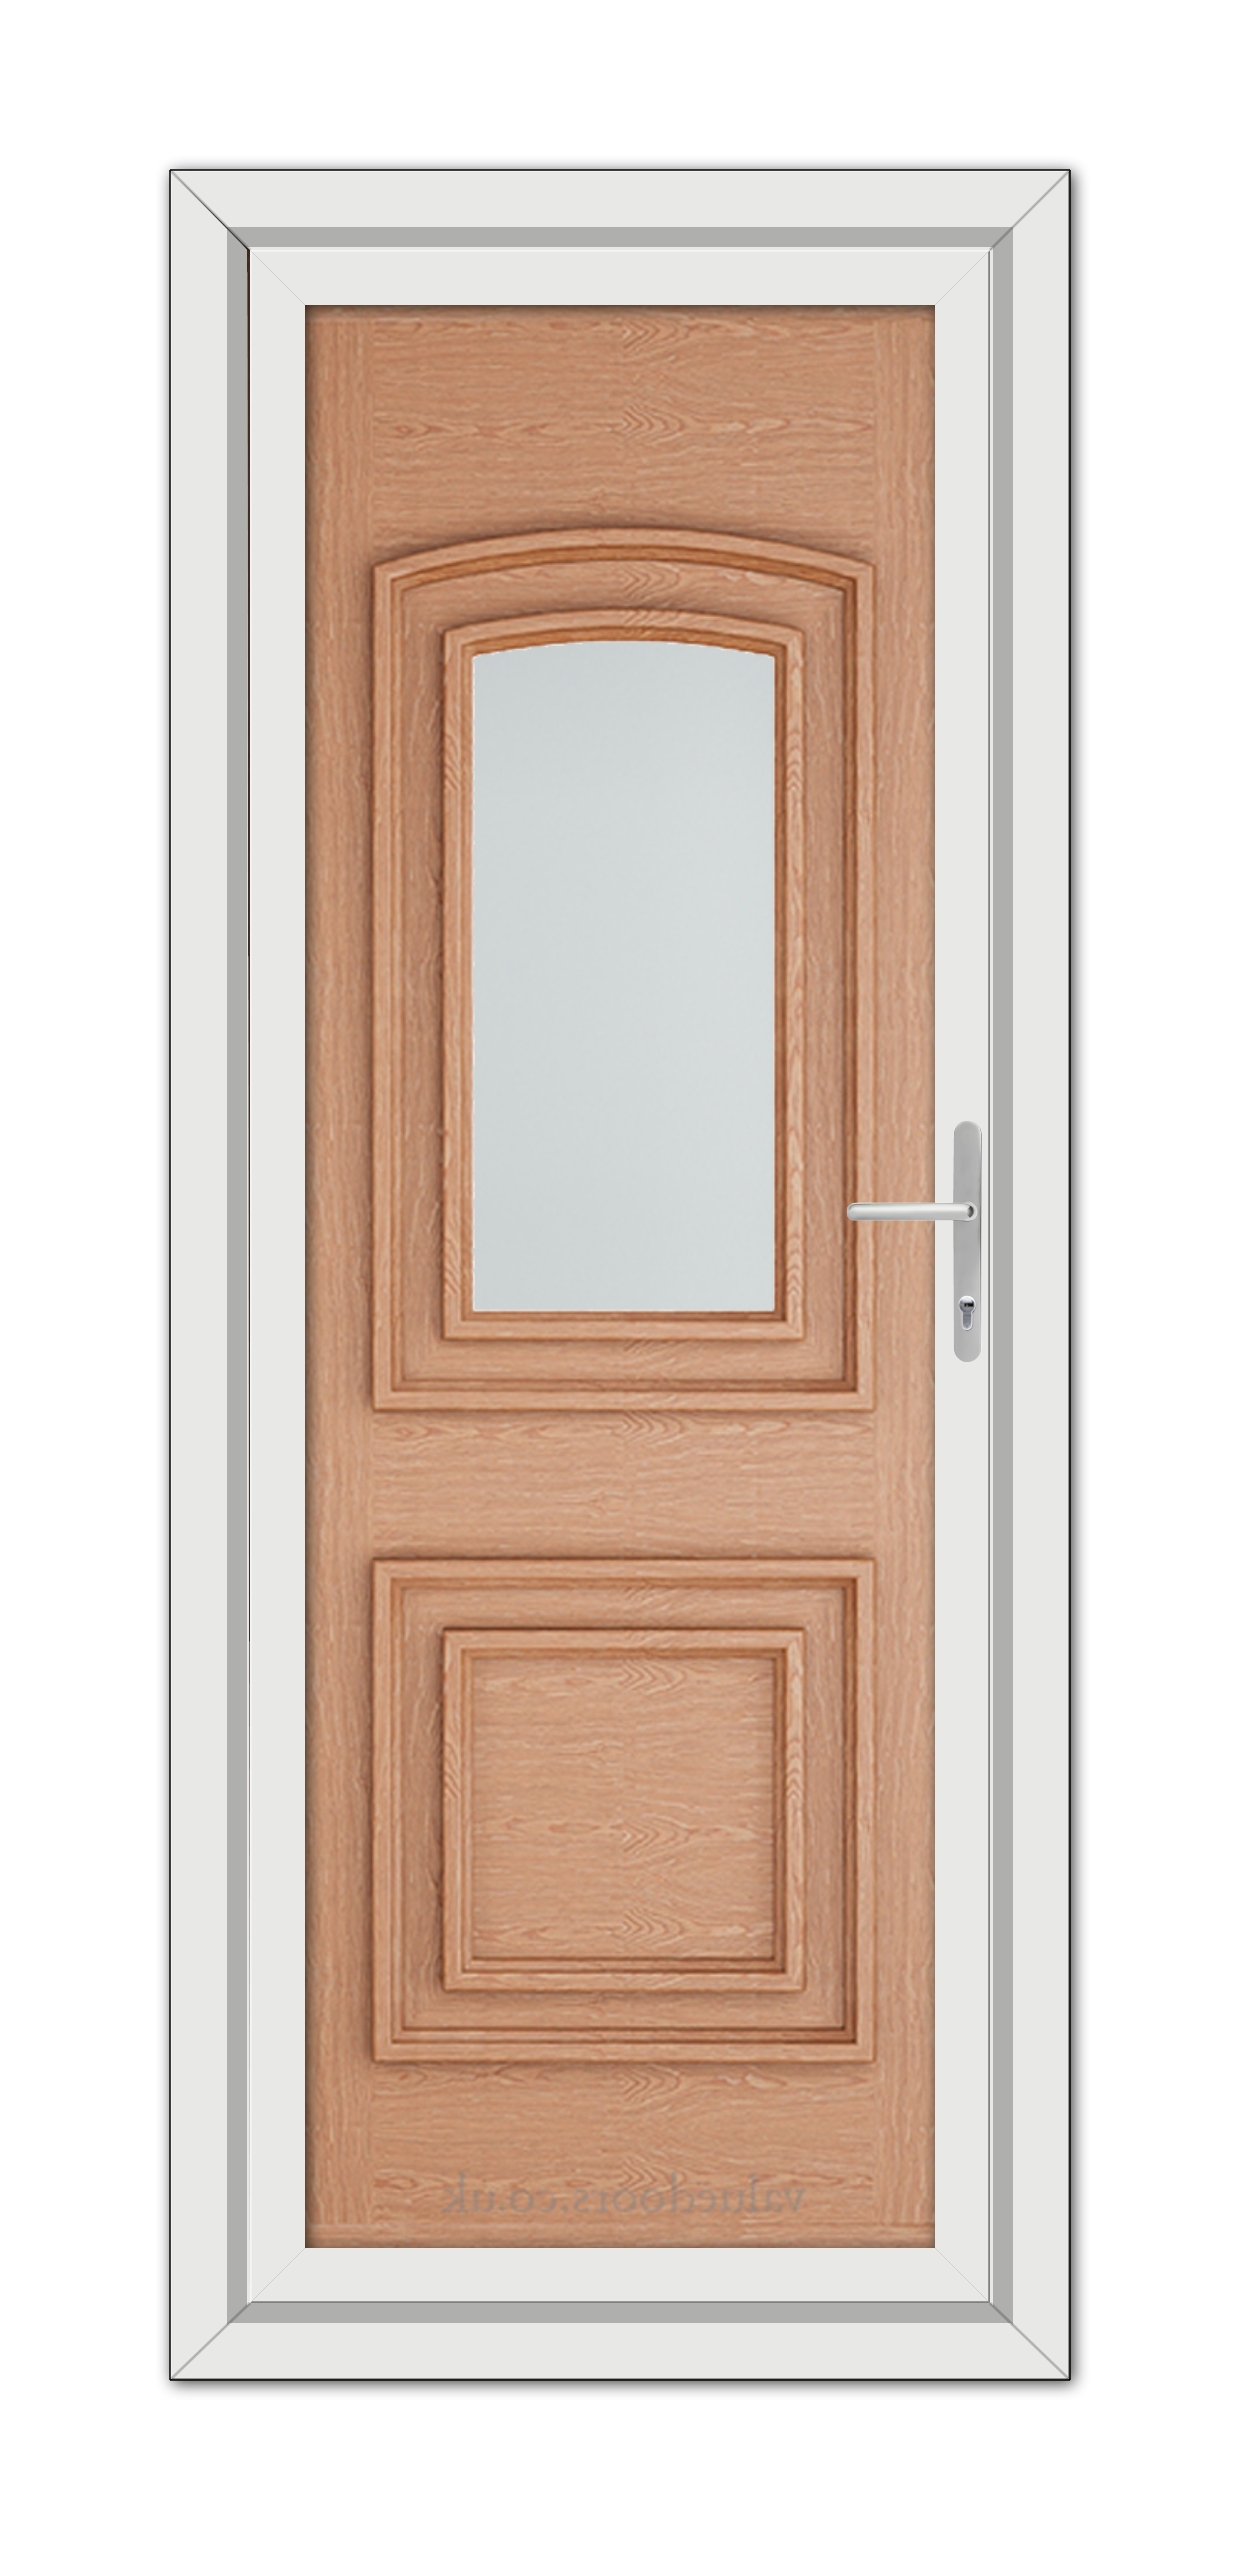 A Irish Oak Balmoral One uPVC door with a rectangular glass panel and a stainless steel handle, set within a white frame.